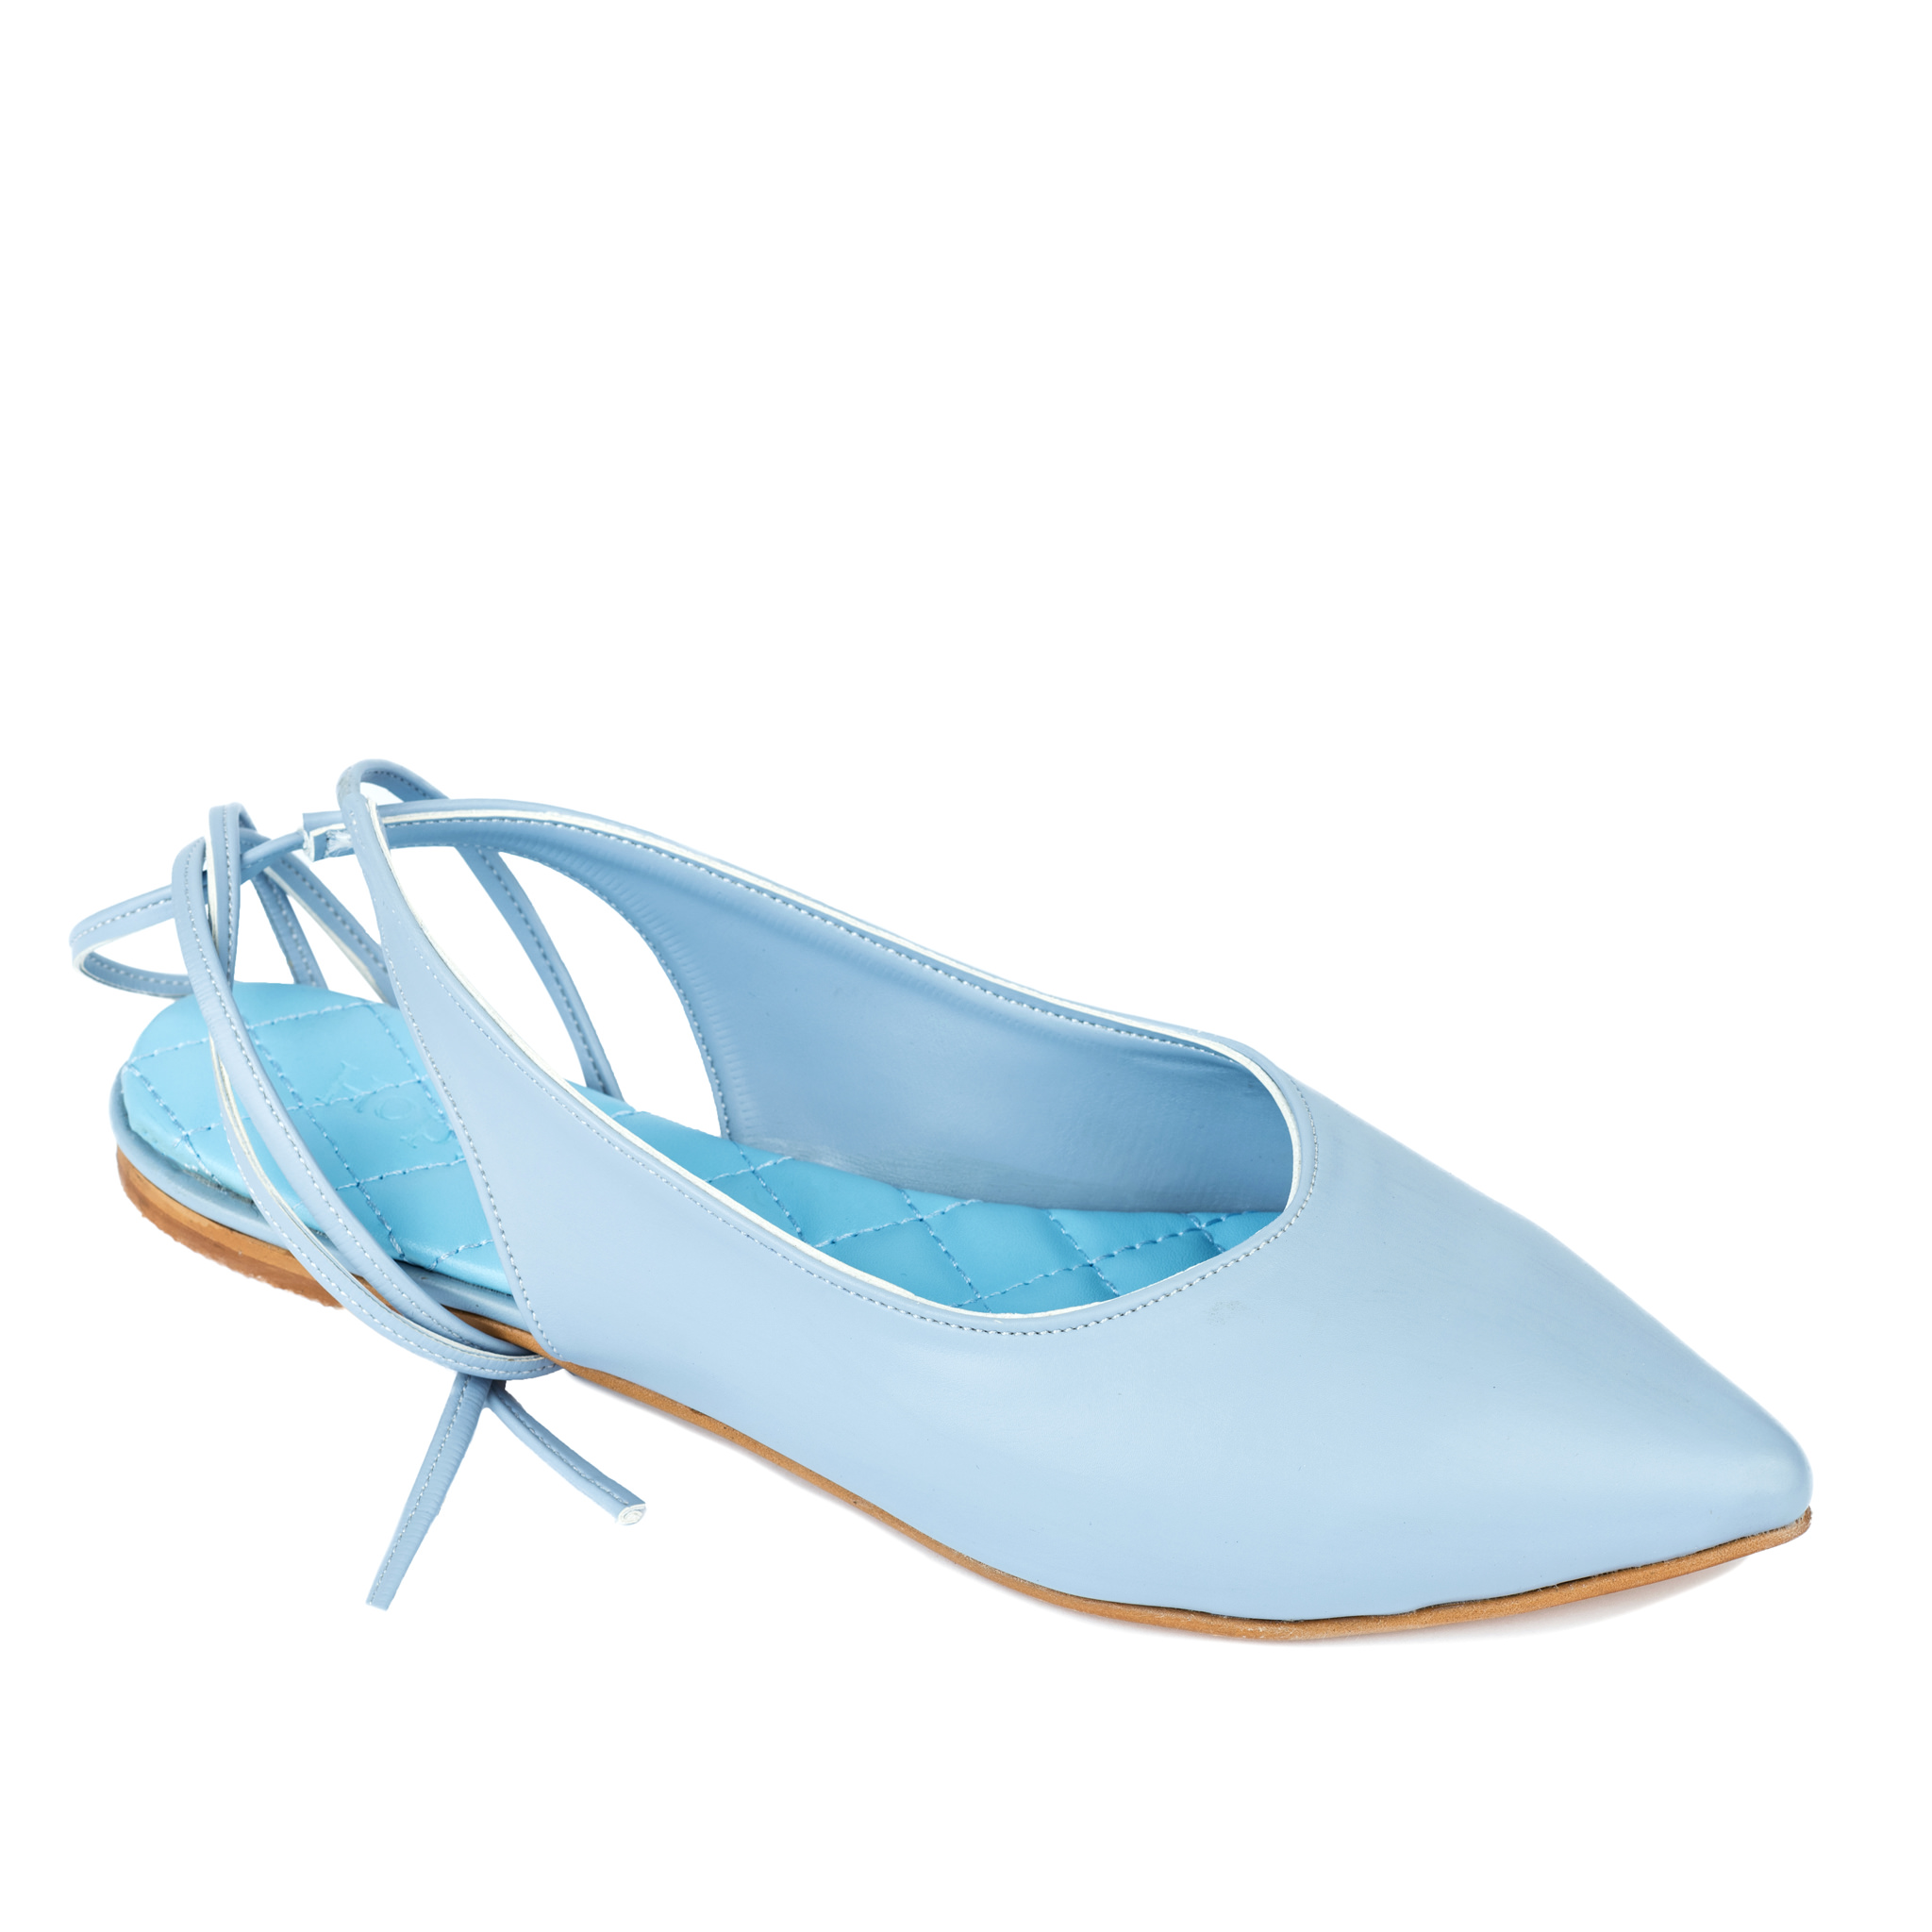 POINTED LACE UP SANDALS - BLUE